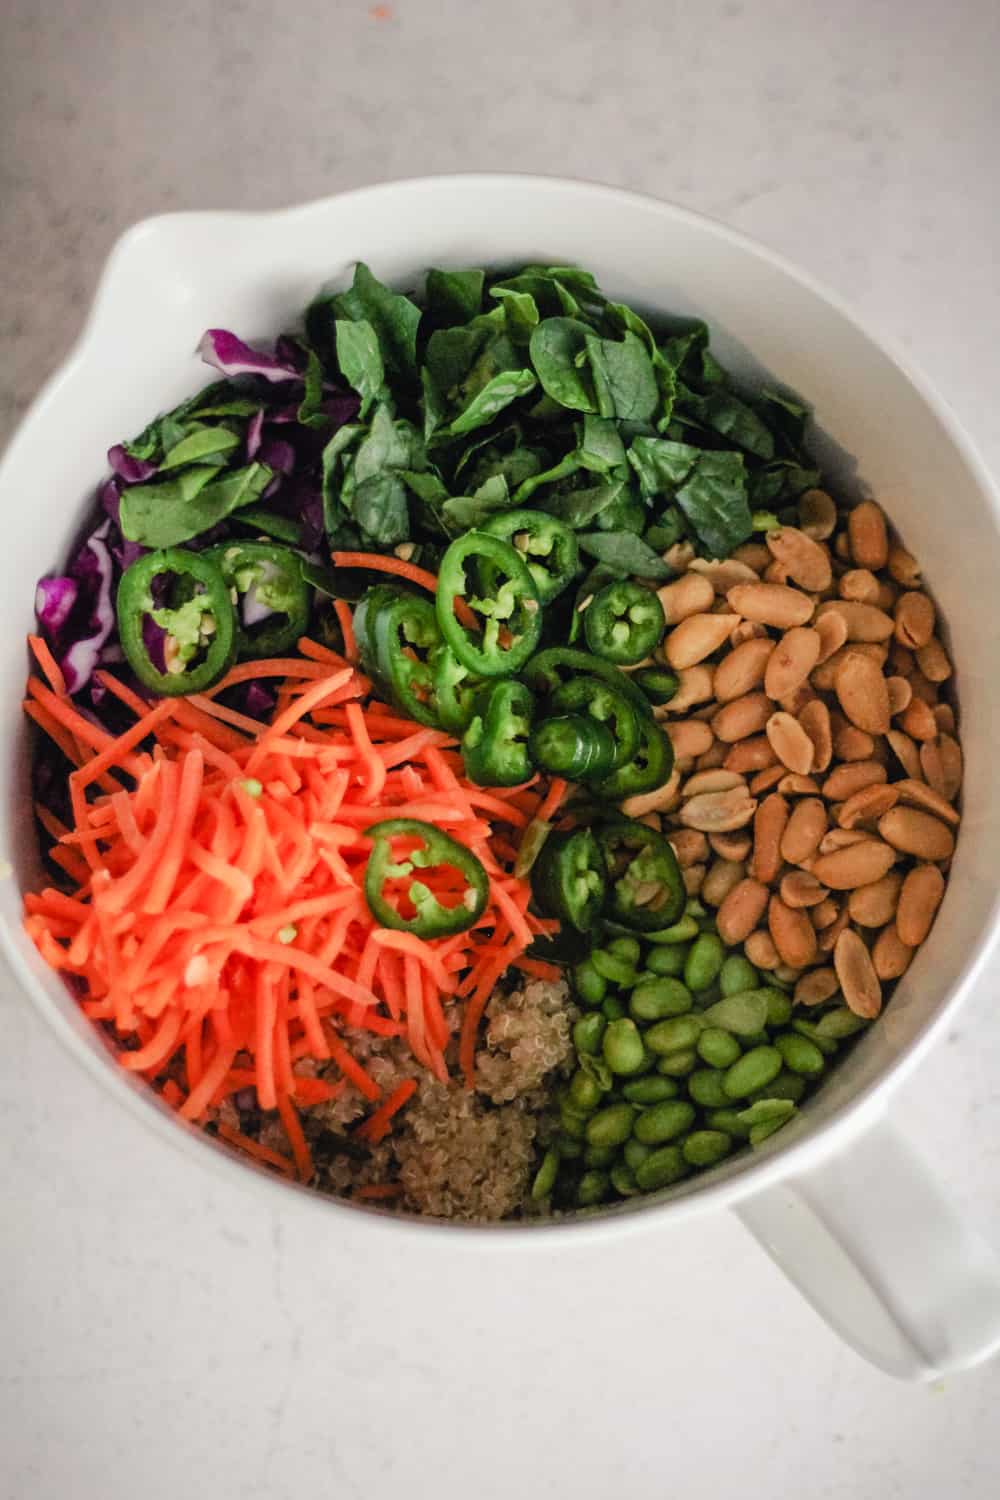 Salad ingredients in a large mixing bowl, including spinach, cabbage, carrots, peanuts, quinoa, edamame, and jalapeño. 